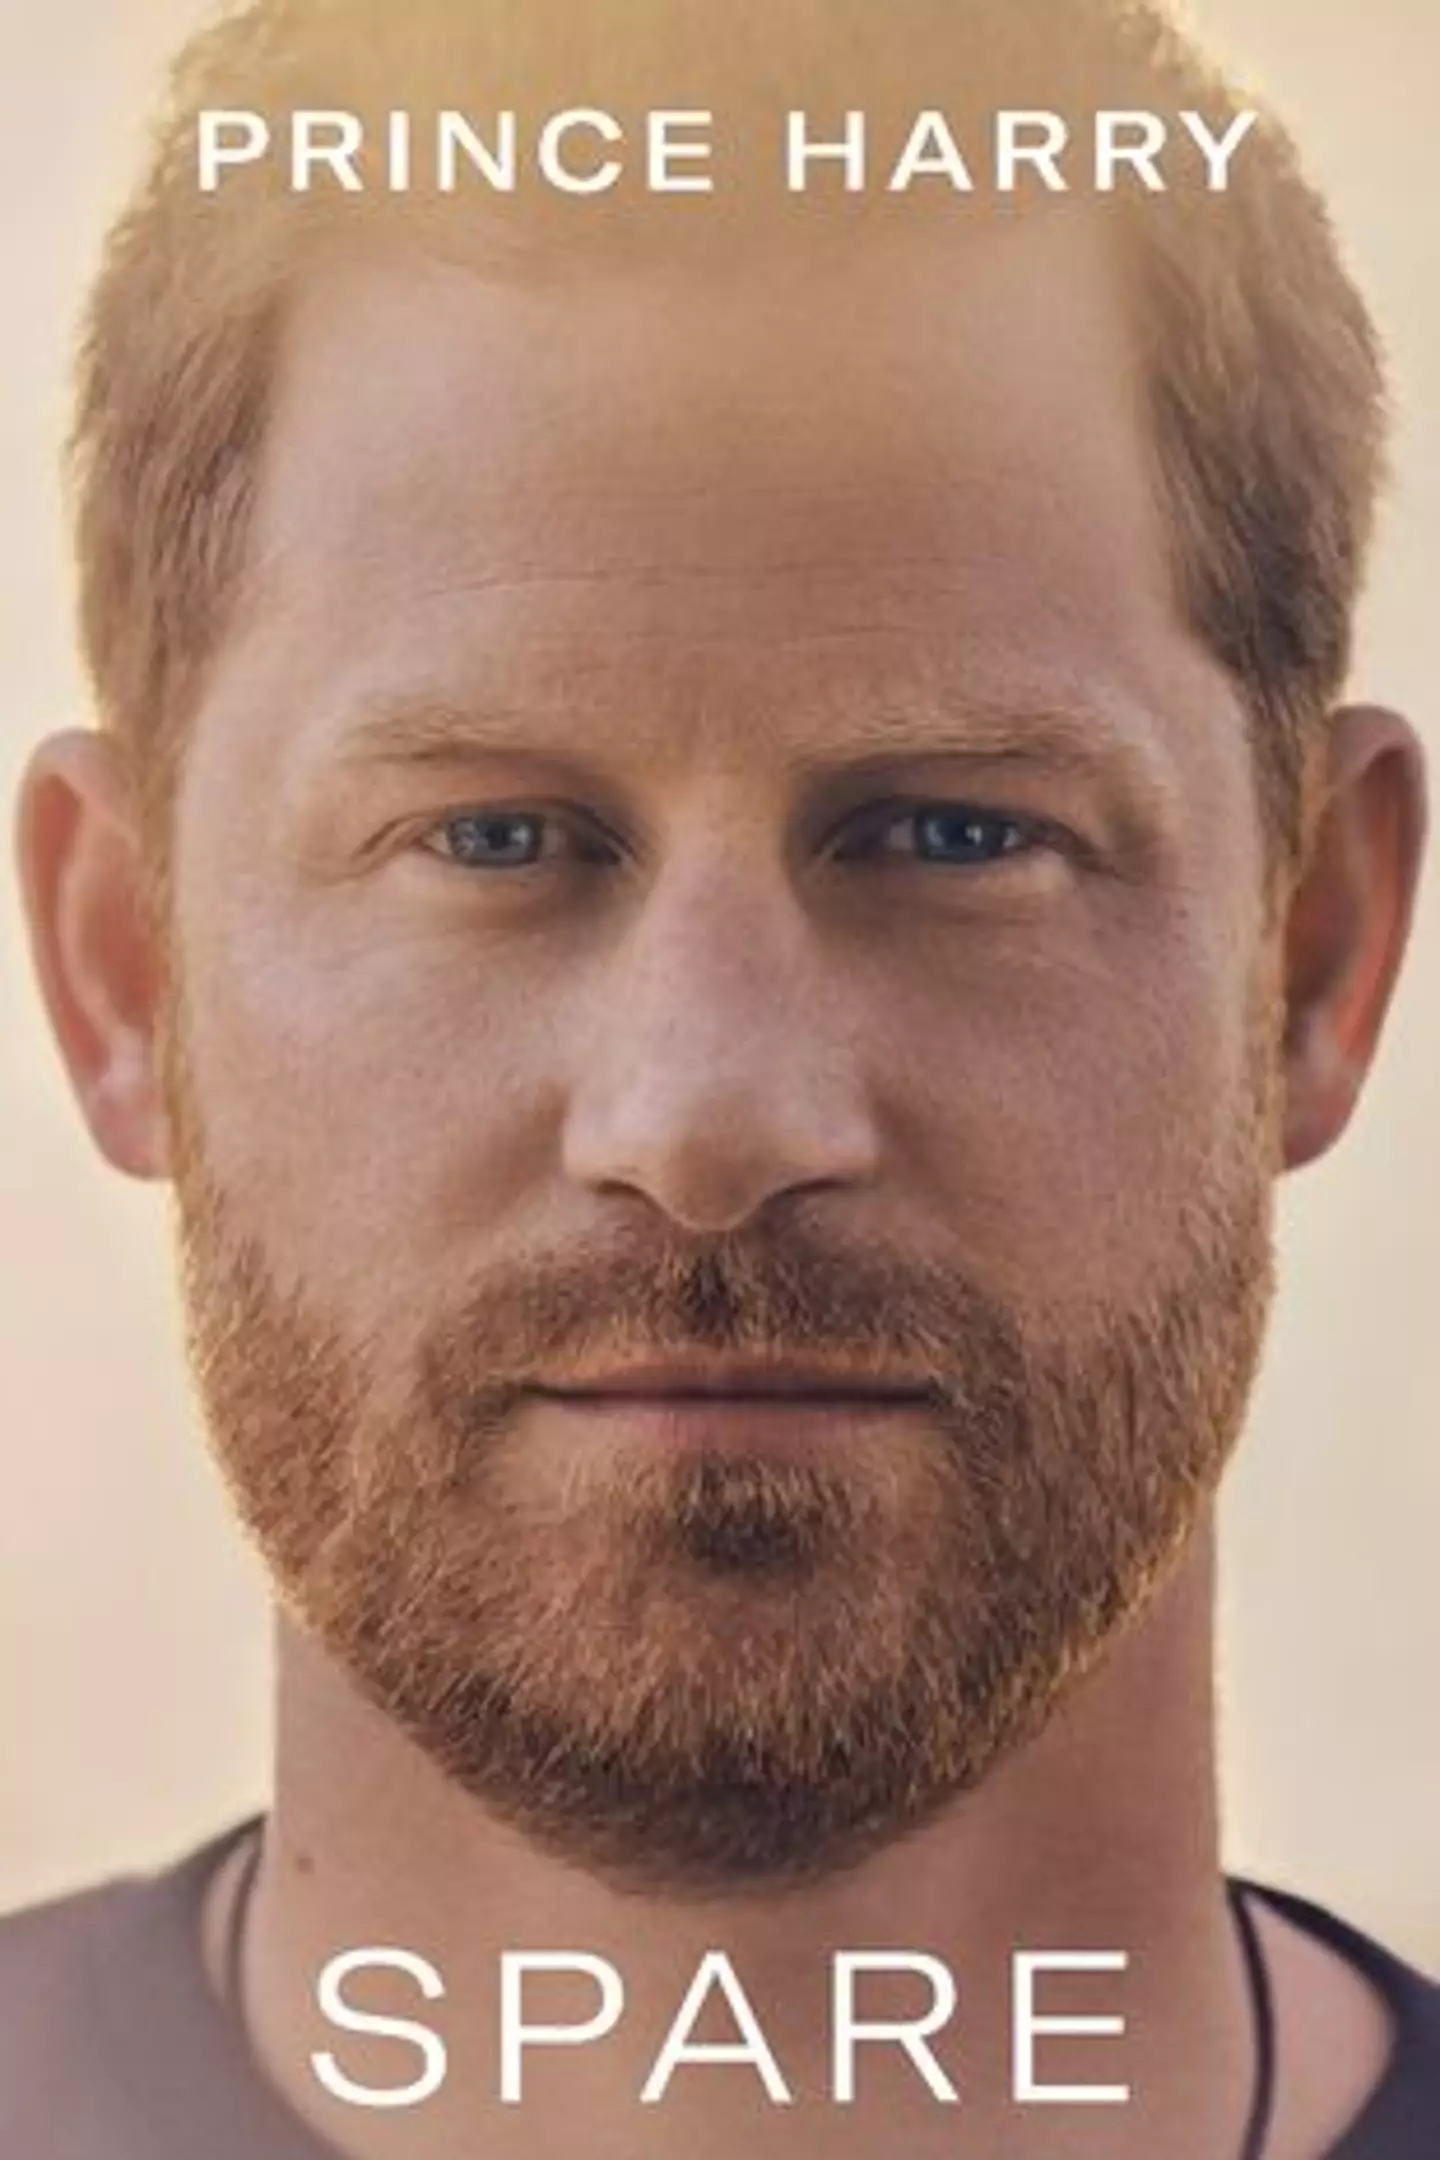 Prince Harry's upcoming memoir will be released in January.